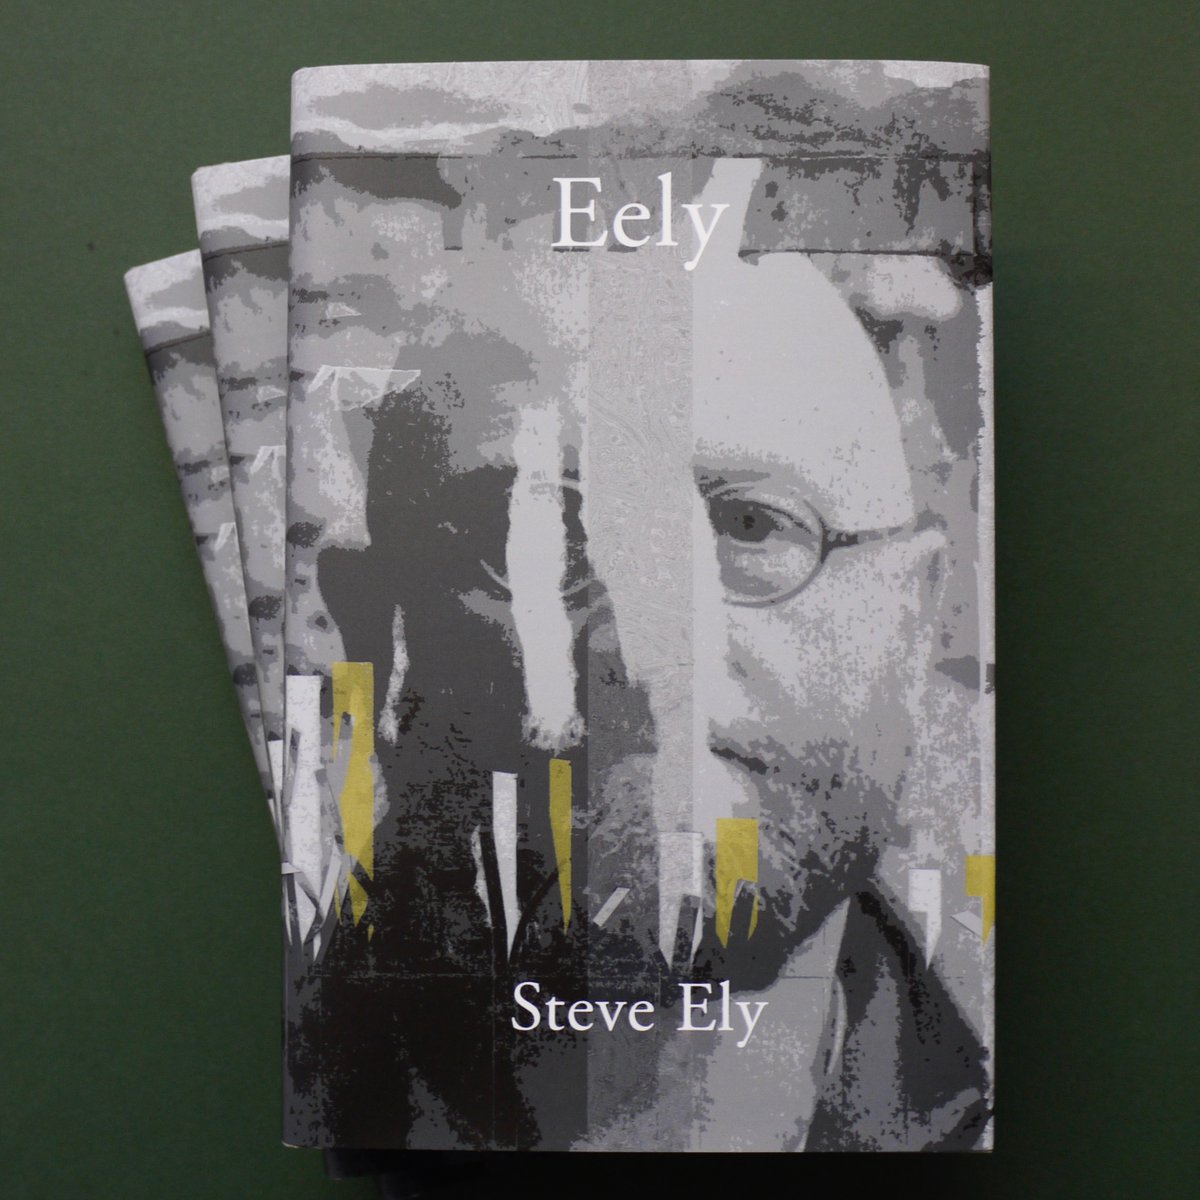 The burbots of Guthlac, biting out proofs from benthic Huguenot Bibles: O smite the land for the water’s sake: the dreaming of the eelish heart is evil from its youth. 'Eely' Steve Ely A symphony in four movements Out now longbarrowpress.com/current-public…